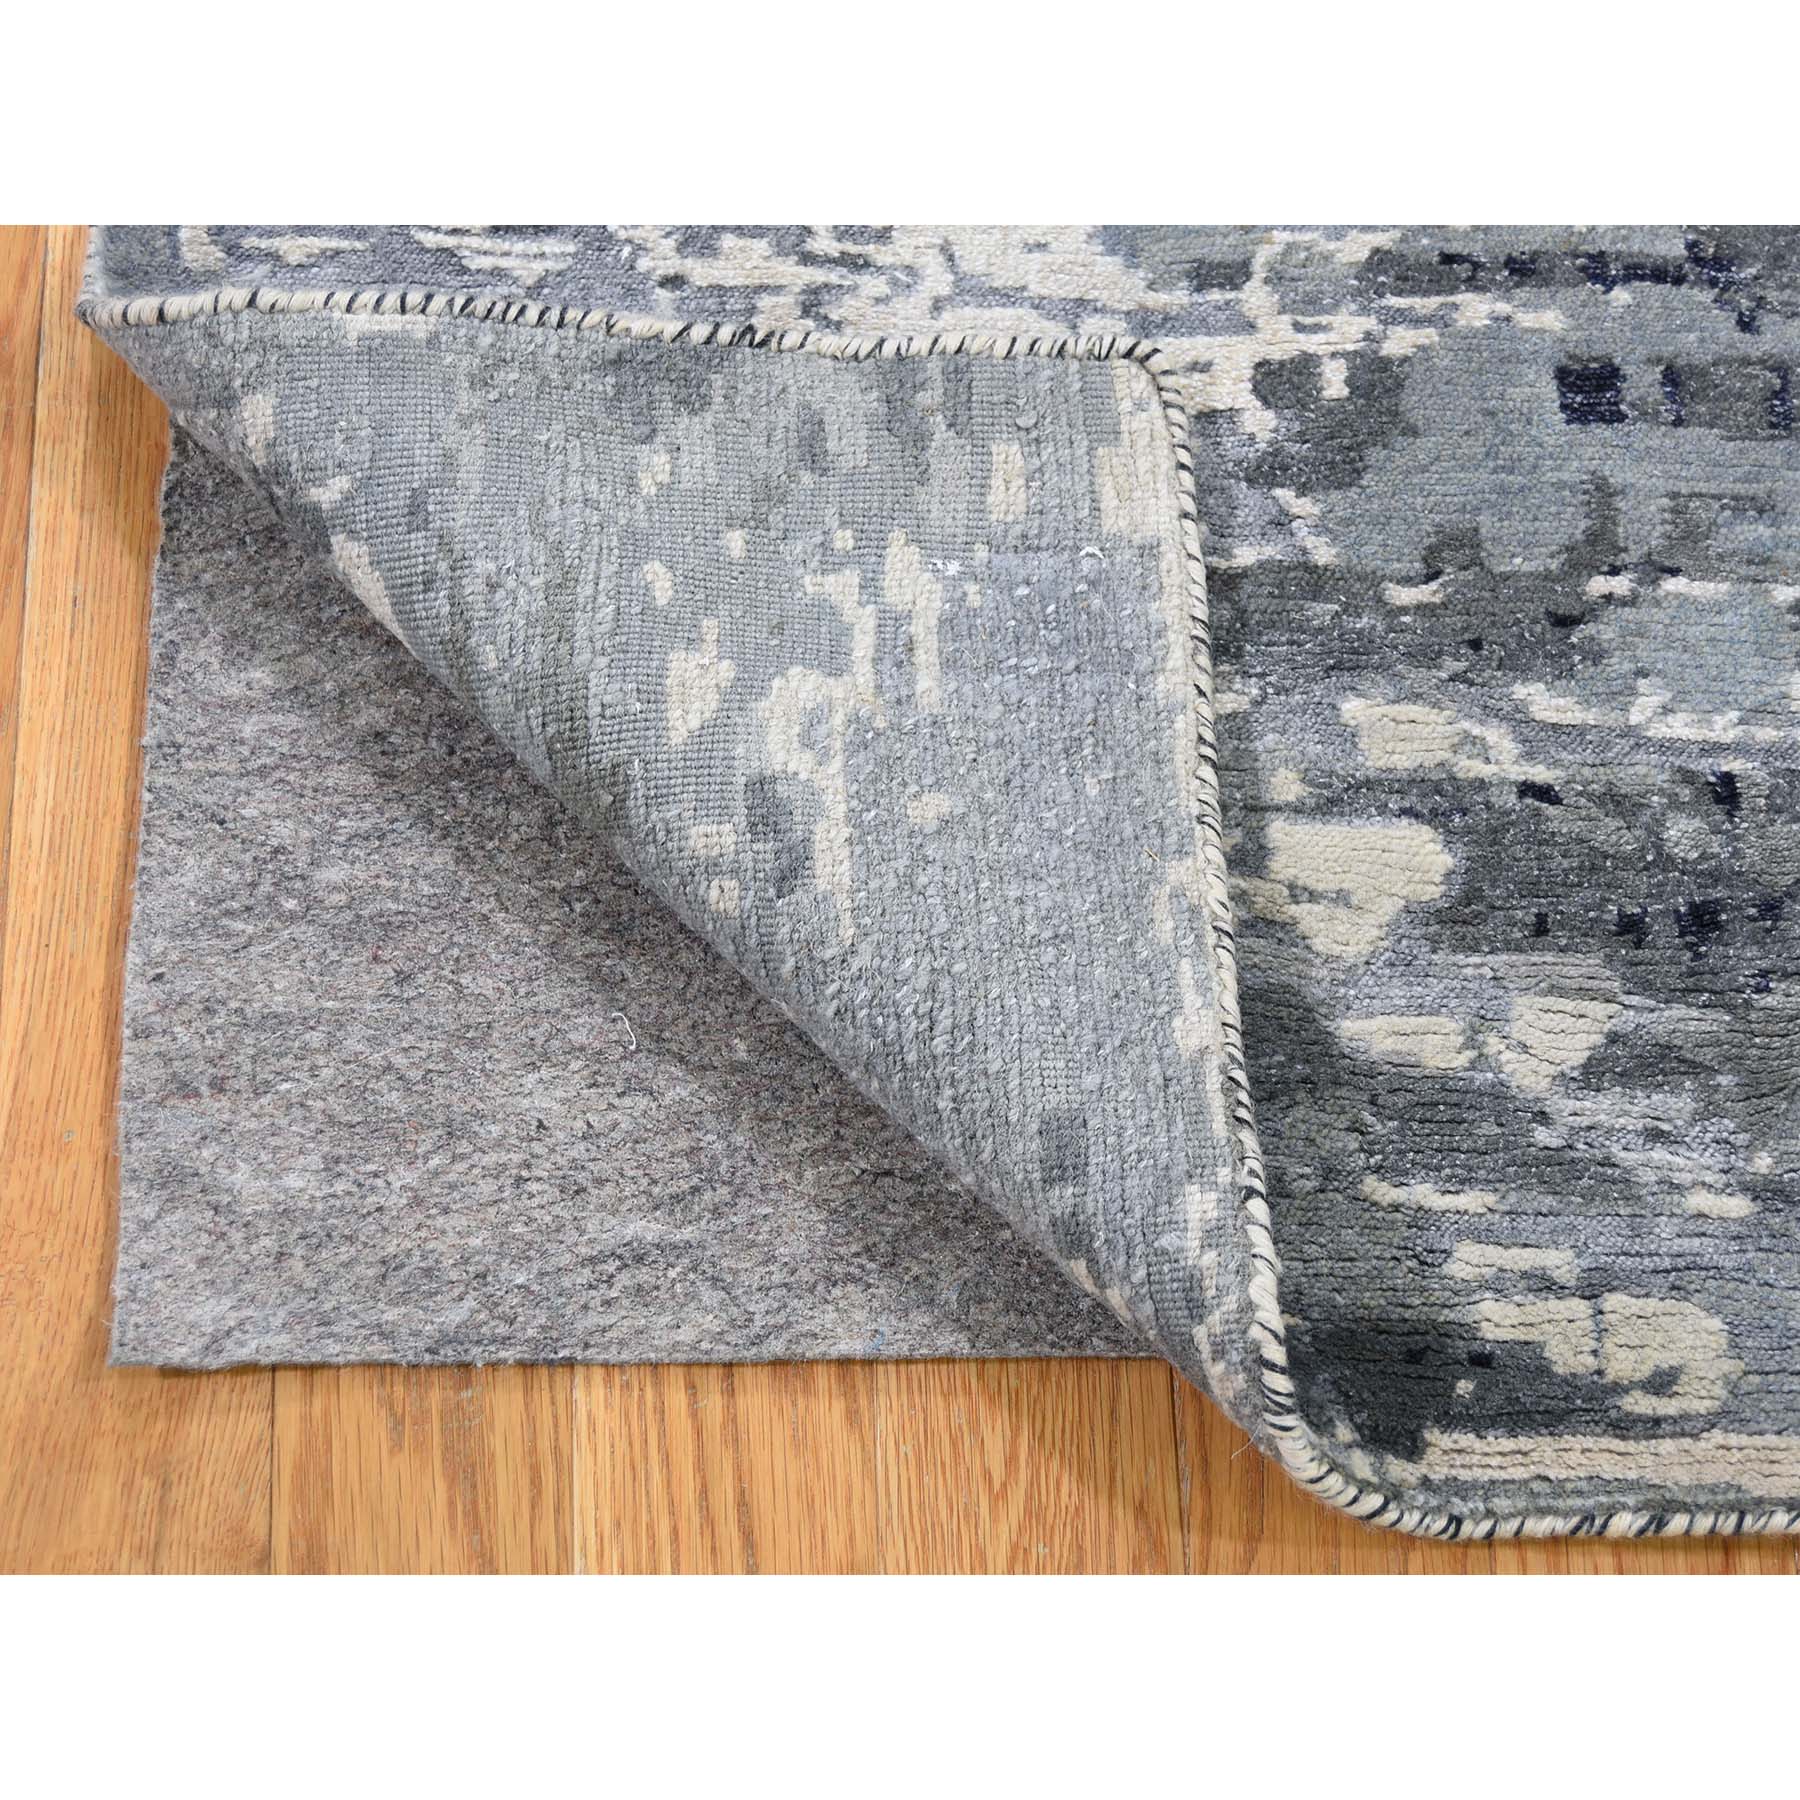 2'x3' Hi-Low Pile Abstract Design Wool And Silk Hand Woven Oriental Rug Mat 